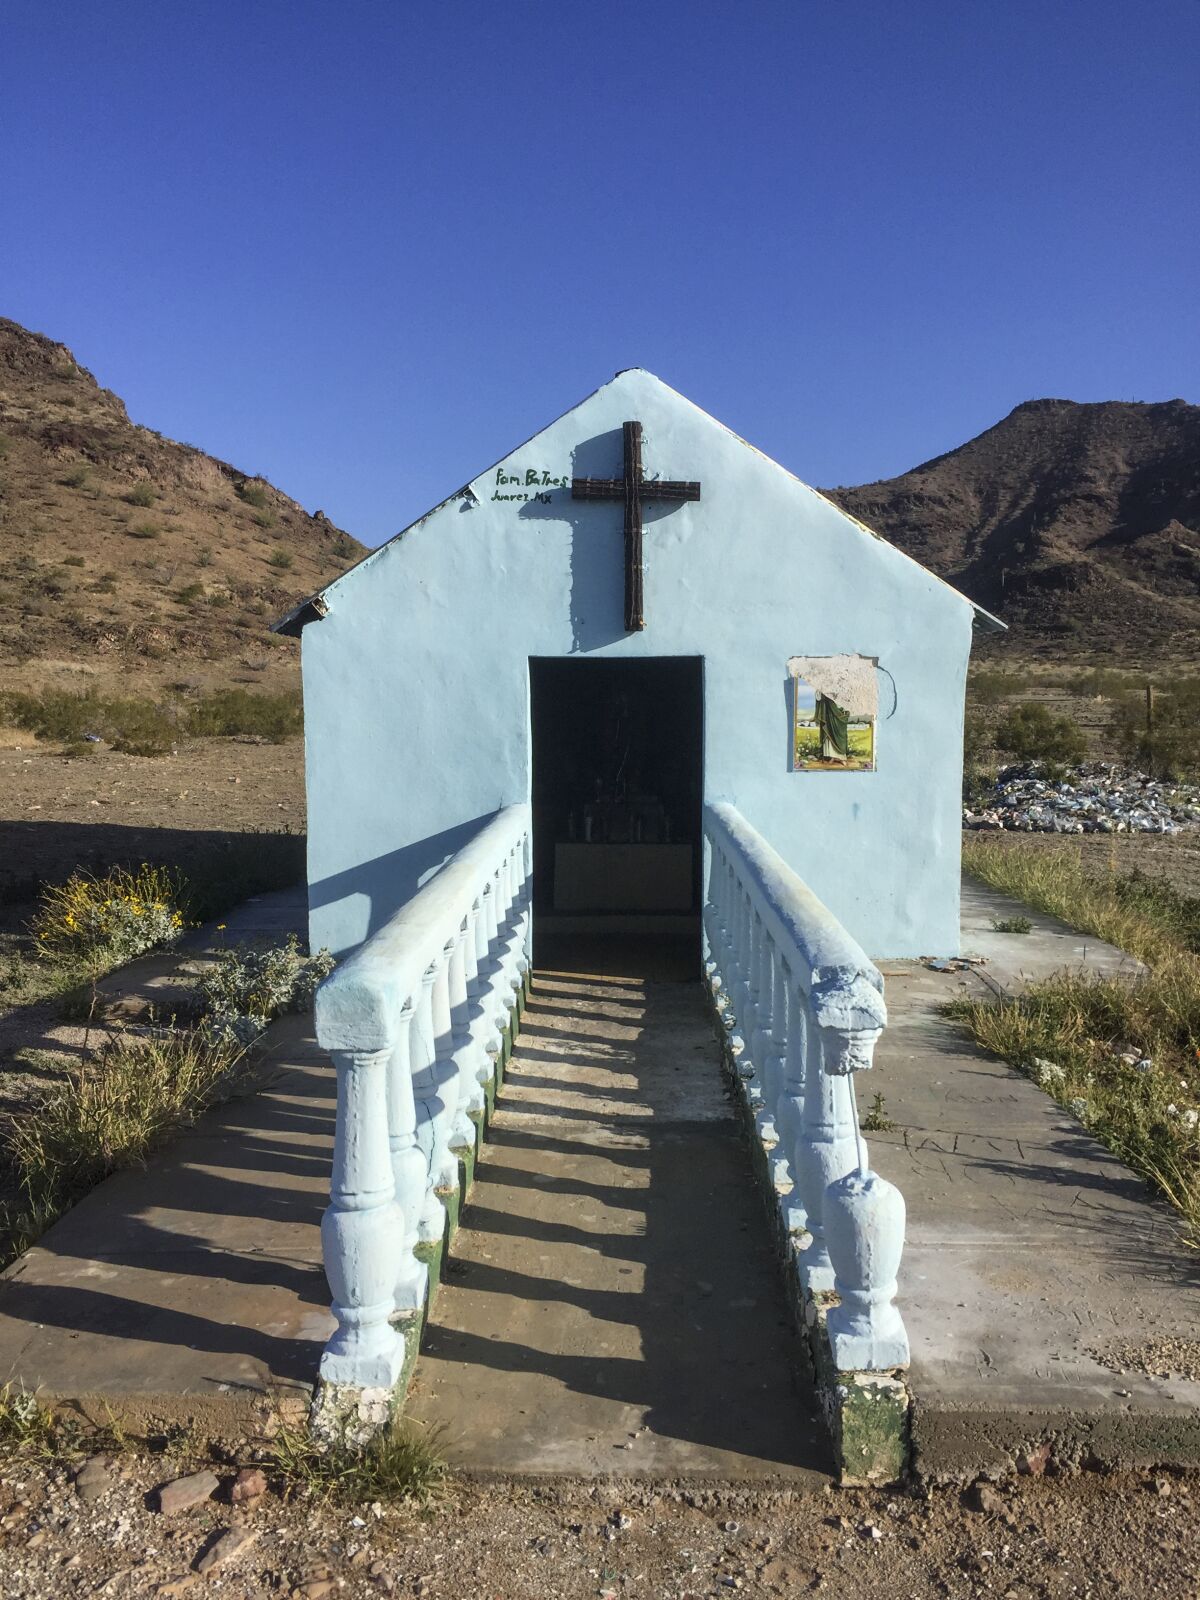 A roadside shrine along Highway 8 in Sonora, Mexico.